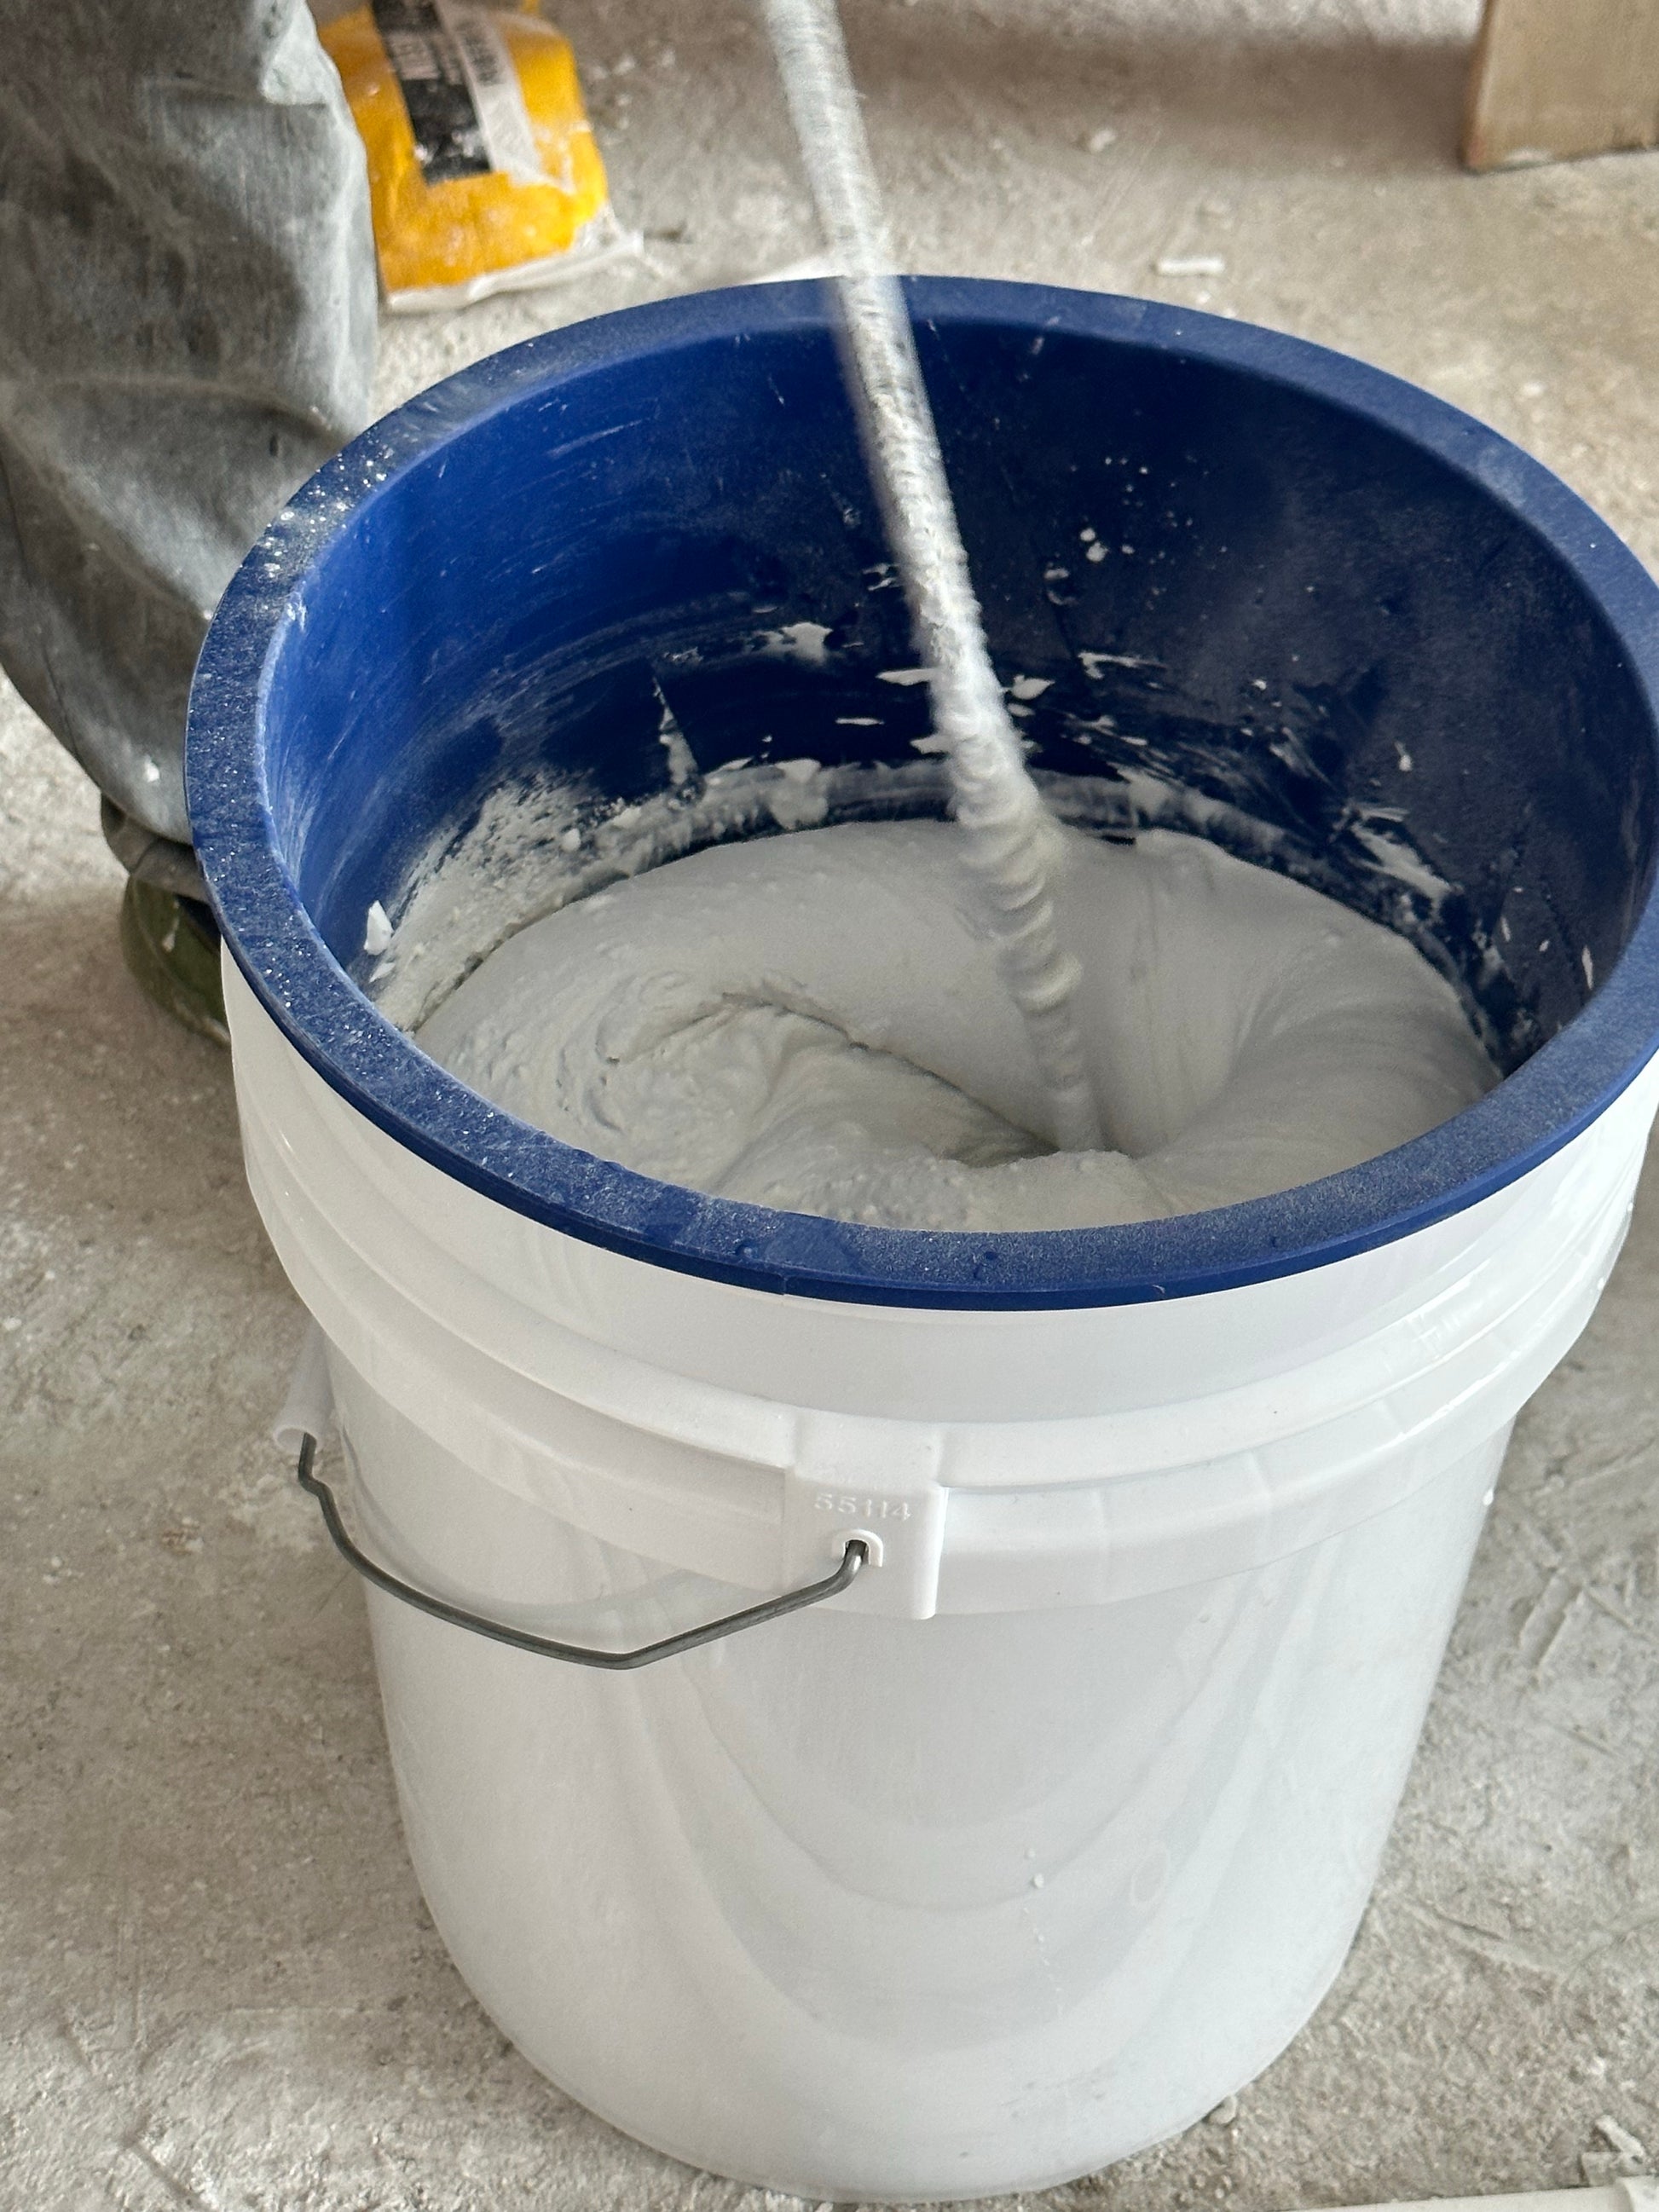 5 Gallon Bucket Liner for Concrete Mix and Mud - Reusable Silicone Bucket  Saver with Graduated Measurements,Flexible Bucket Liner for Mixing Liquid